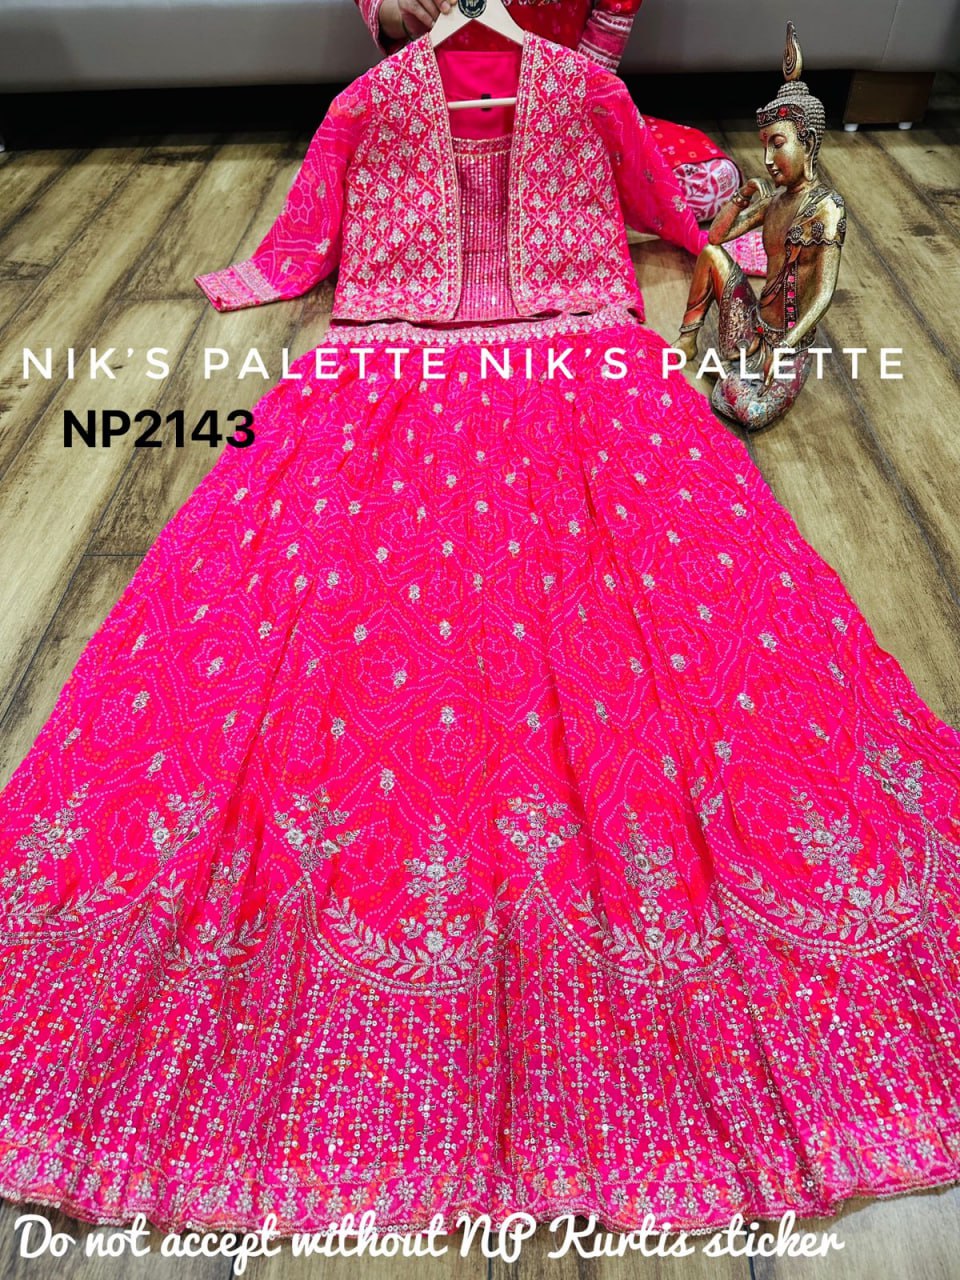 Premium Georgette Bandhani Print Skirt with Zari Embroidered Jacket and Crop Top